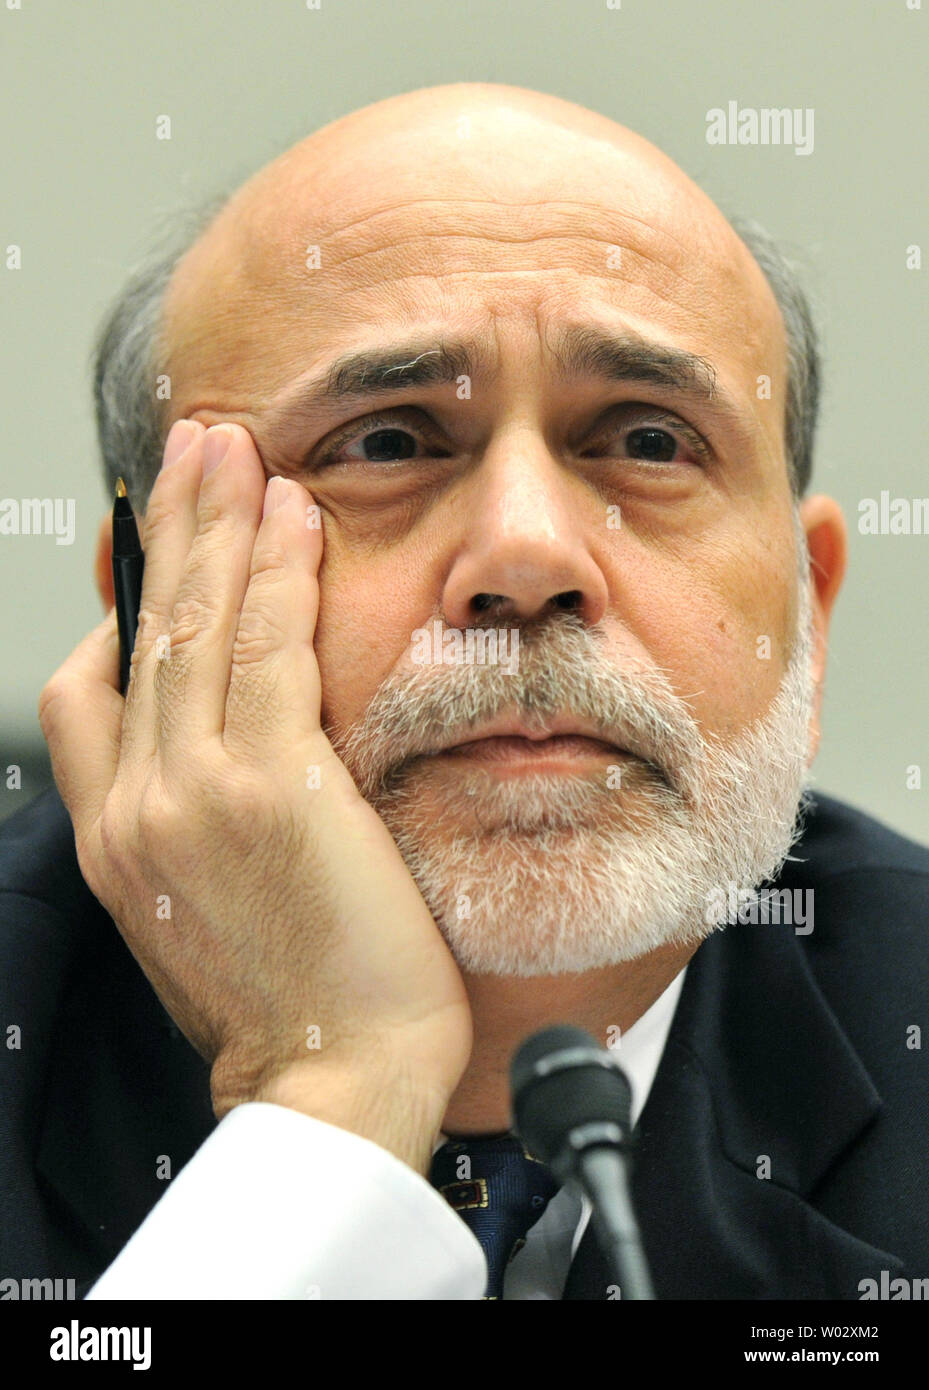 Federal Reserve Board Chairman Ben Bernanke testifies on the board's semiannual monetary policy report before the House Financial Services Committee on Capitol Hill in Washington on July 22, 2010. UPI/Kevin Dietsch Stock Photo